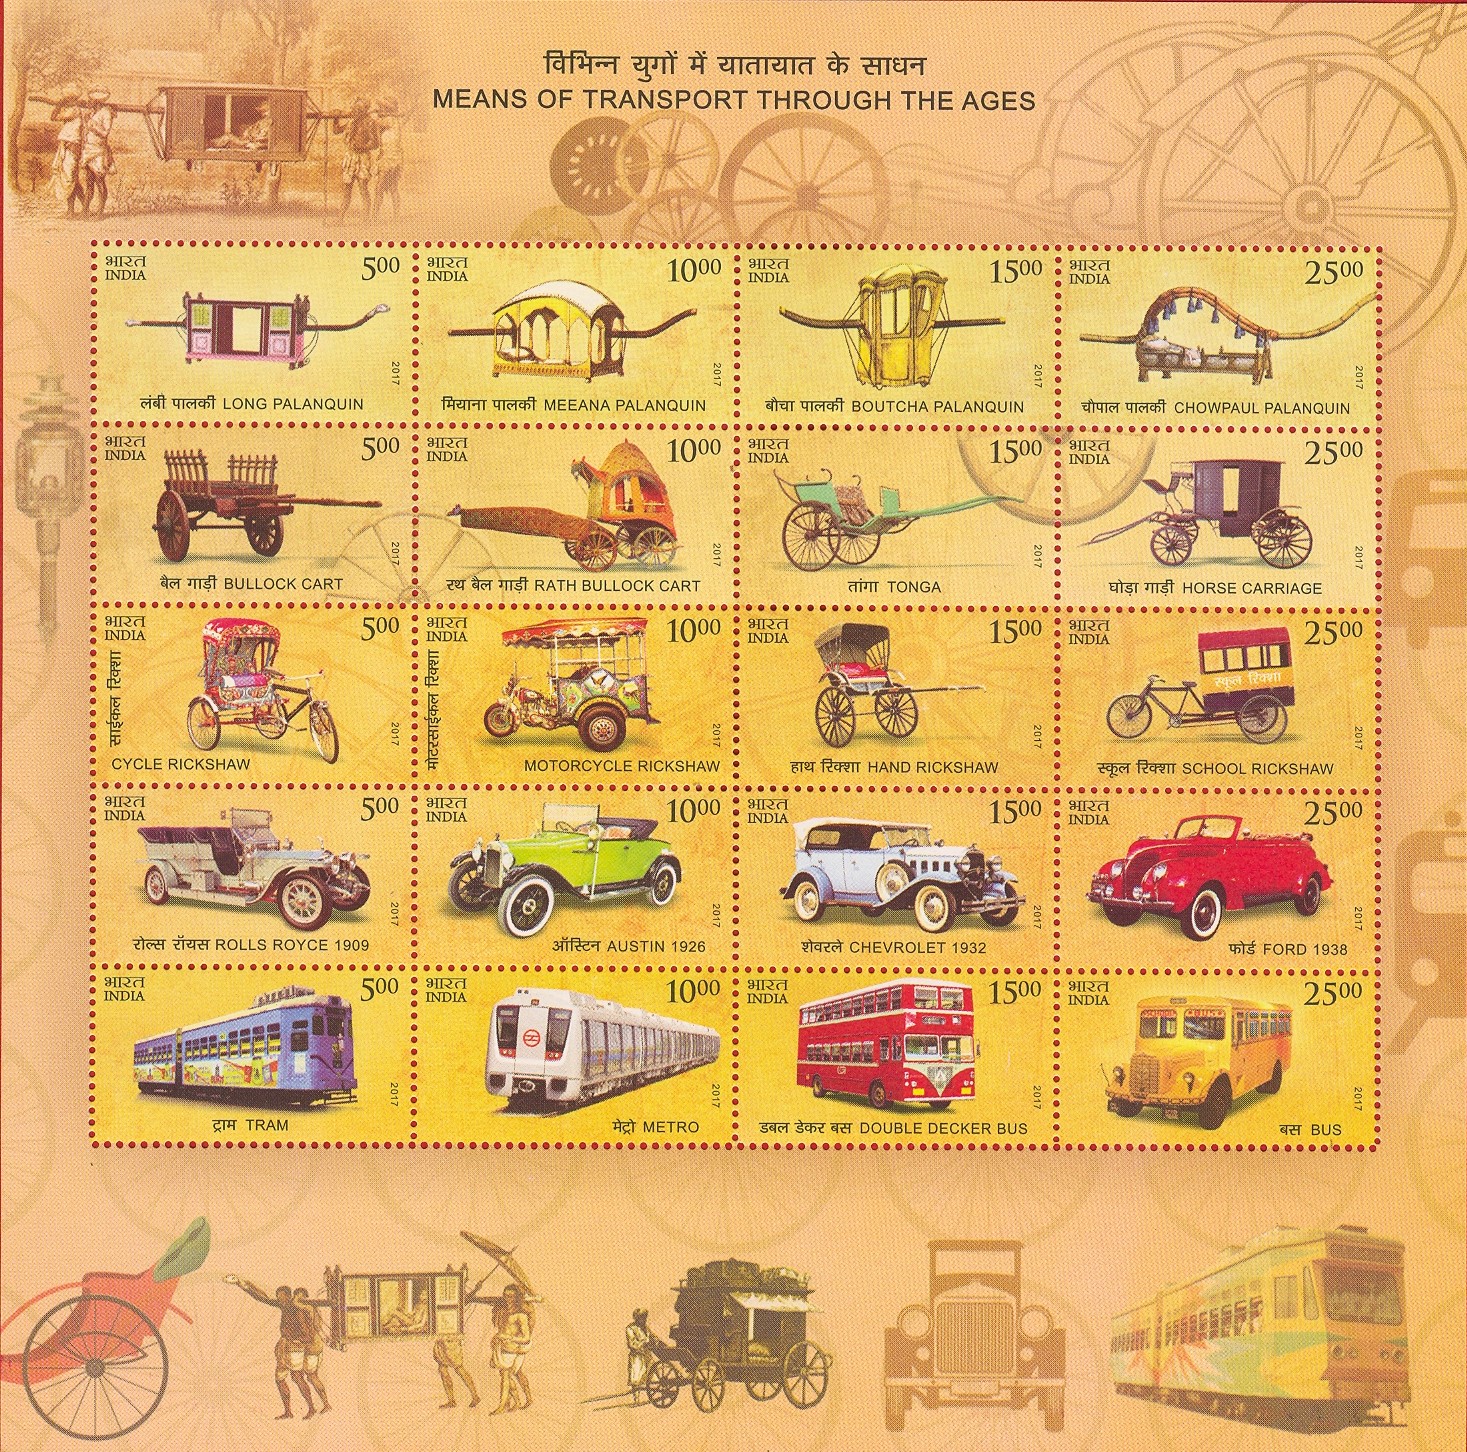 India 2017 Means of Transport through ages Miniature Sheet MNH